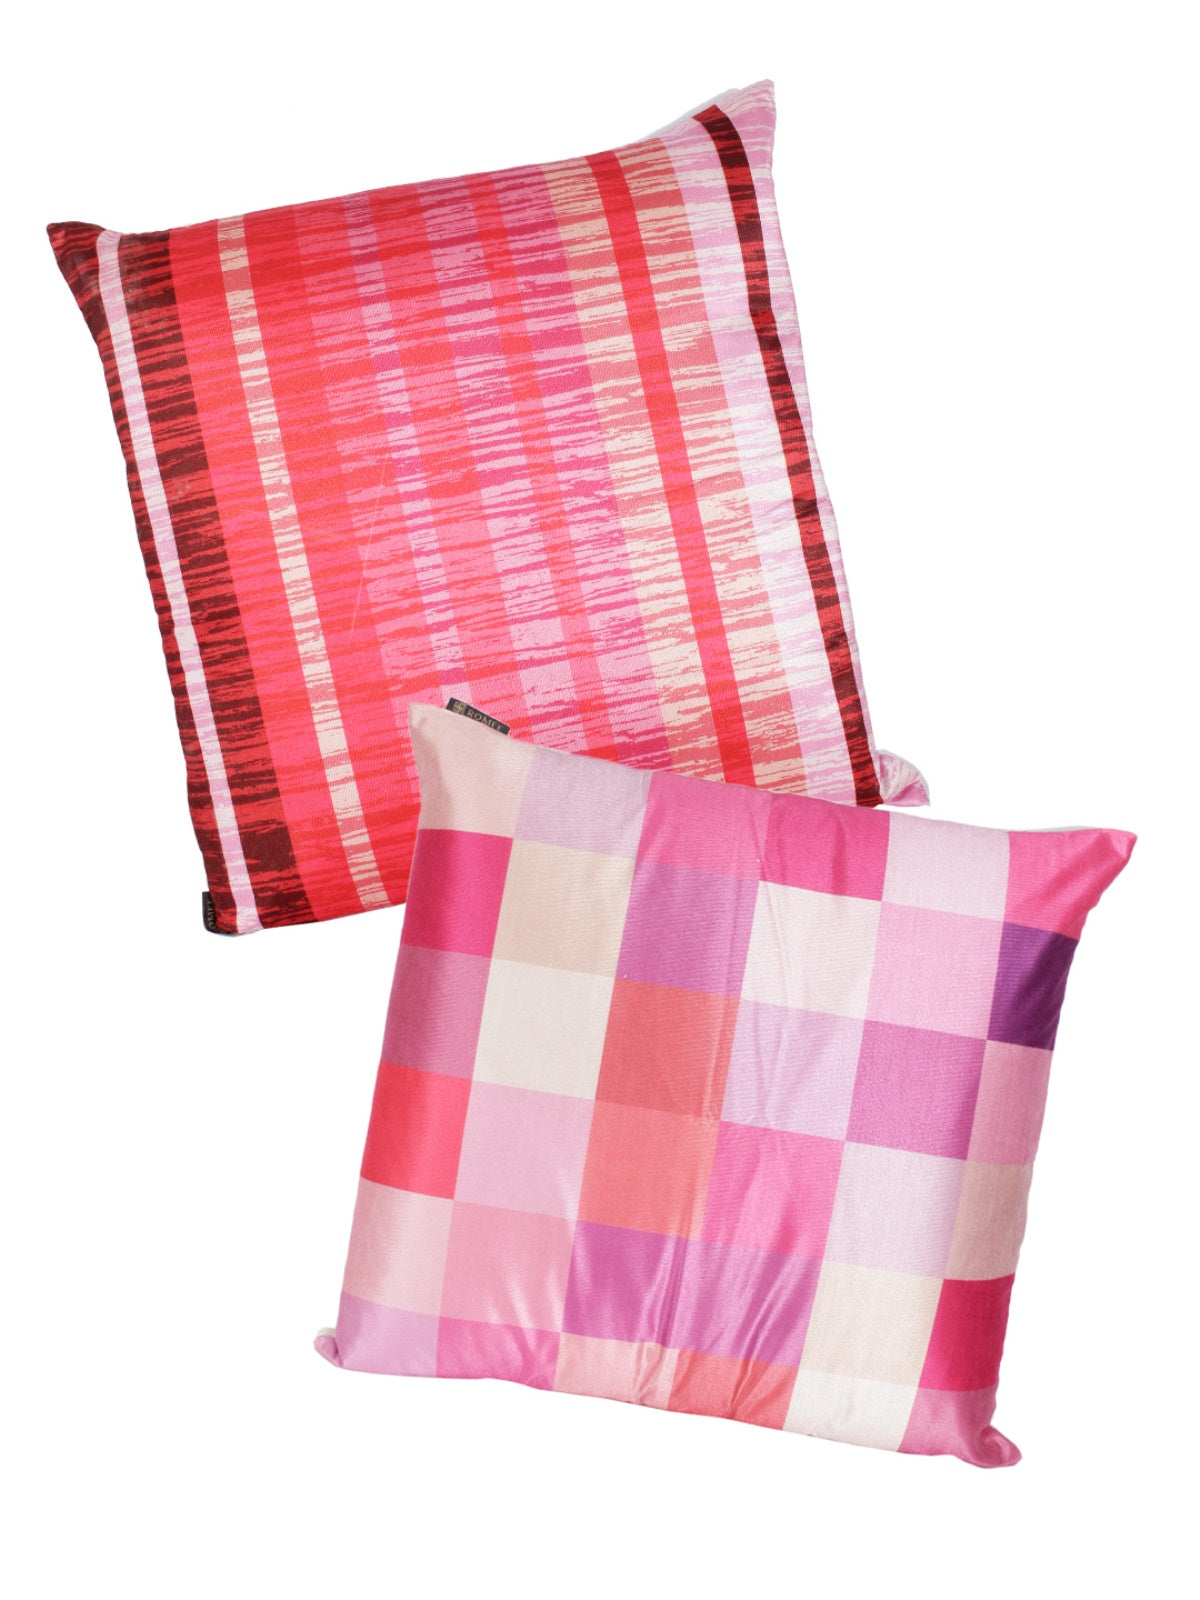 Pink and Red Set of 2 Cushion Covers 24x24 Inch